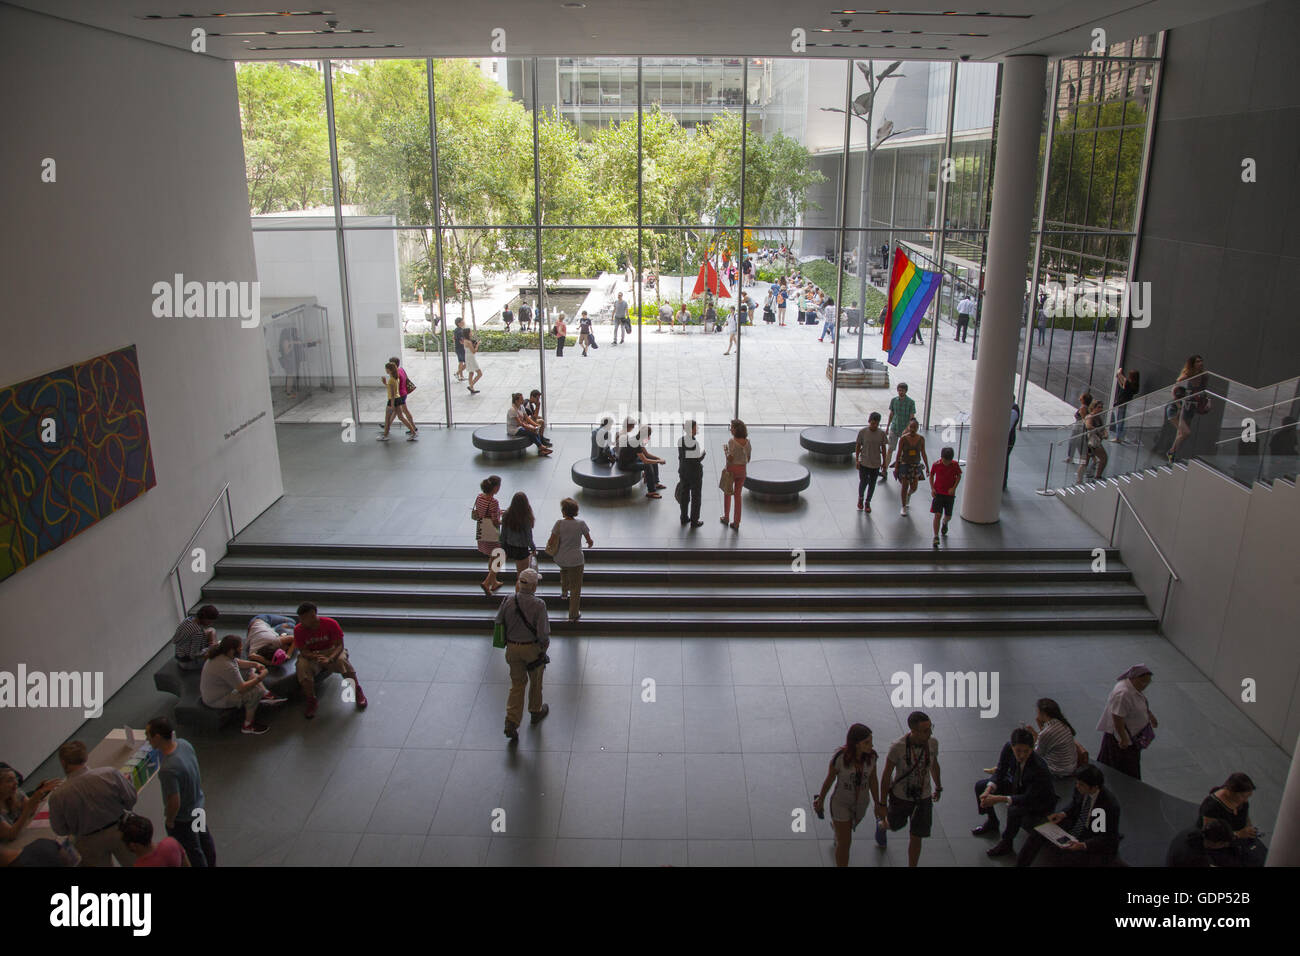 Museum Of Modern Art, MoMA, New York City. Entry hall looking out onto the sculpture garden. Stock Photo